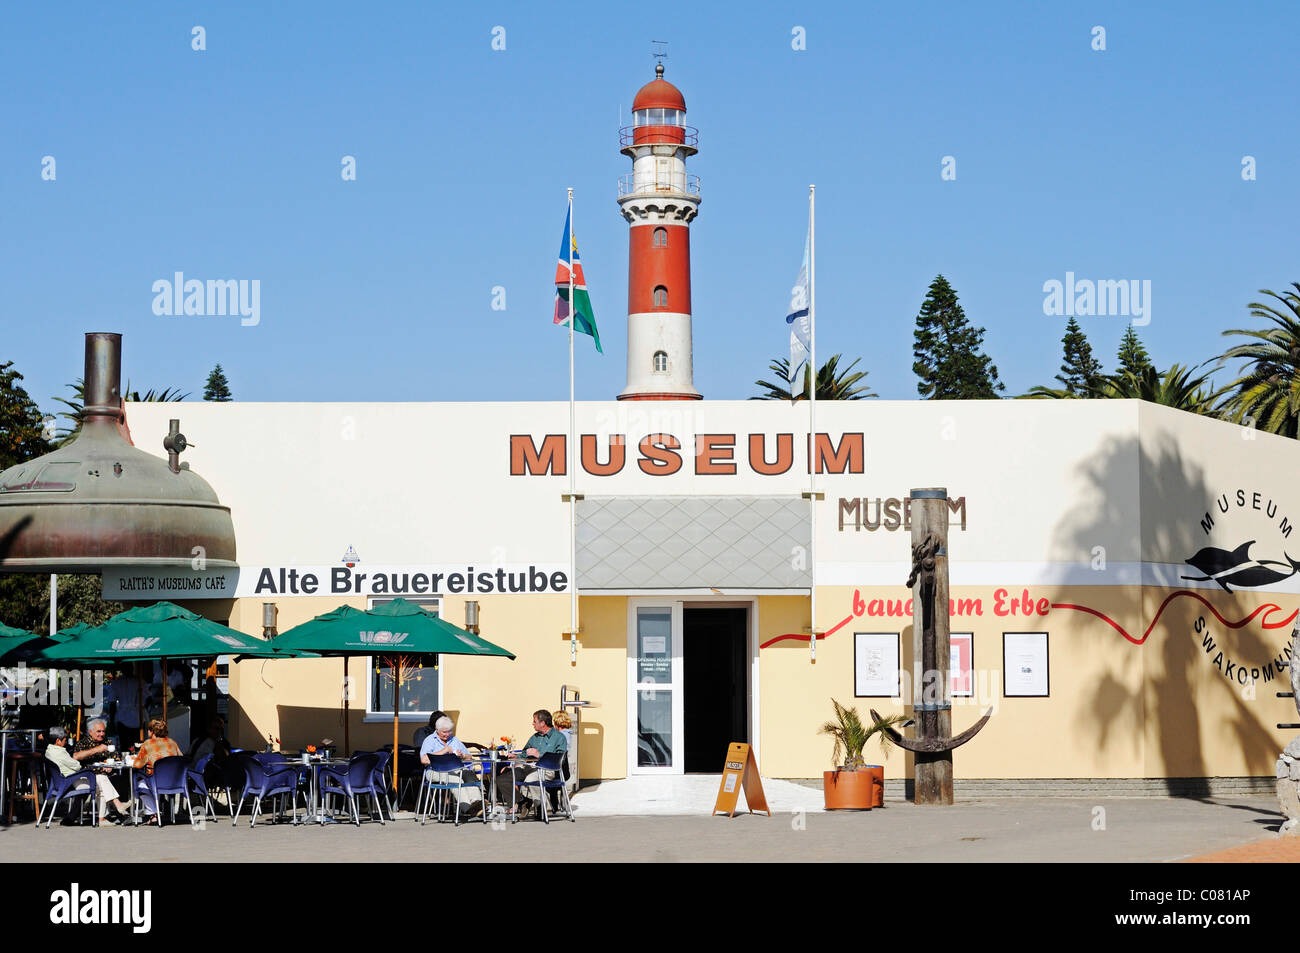 Lighthouse and Swakopmund museum at the pier, architecture built during the German colonial period, Swakopmund, Namibia, Africa Stock Photo